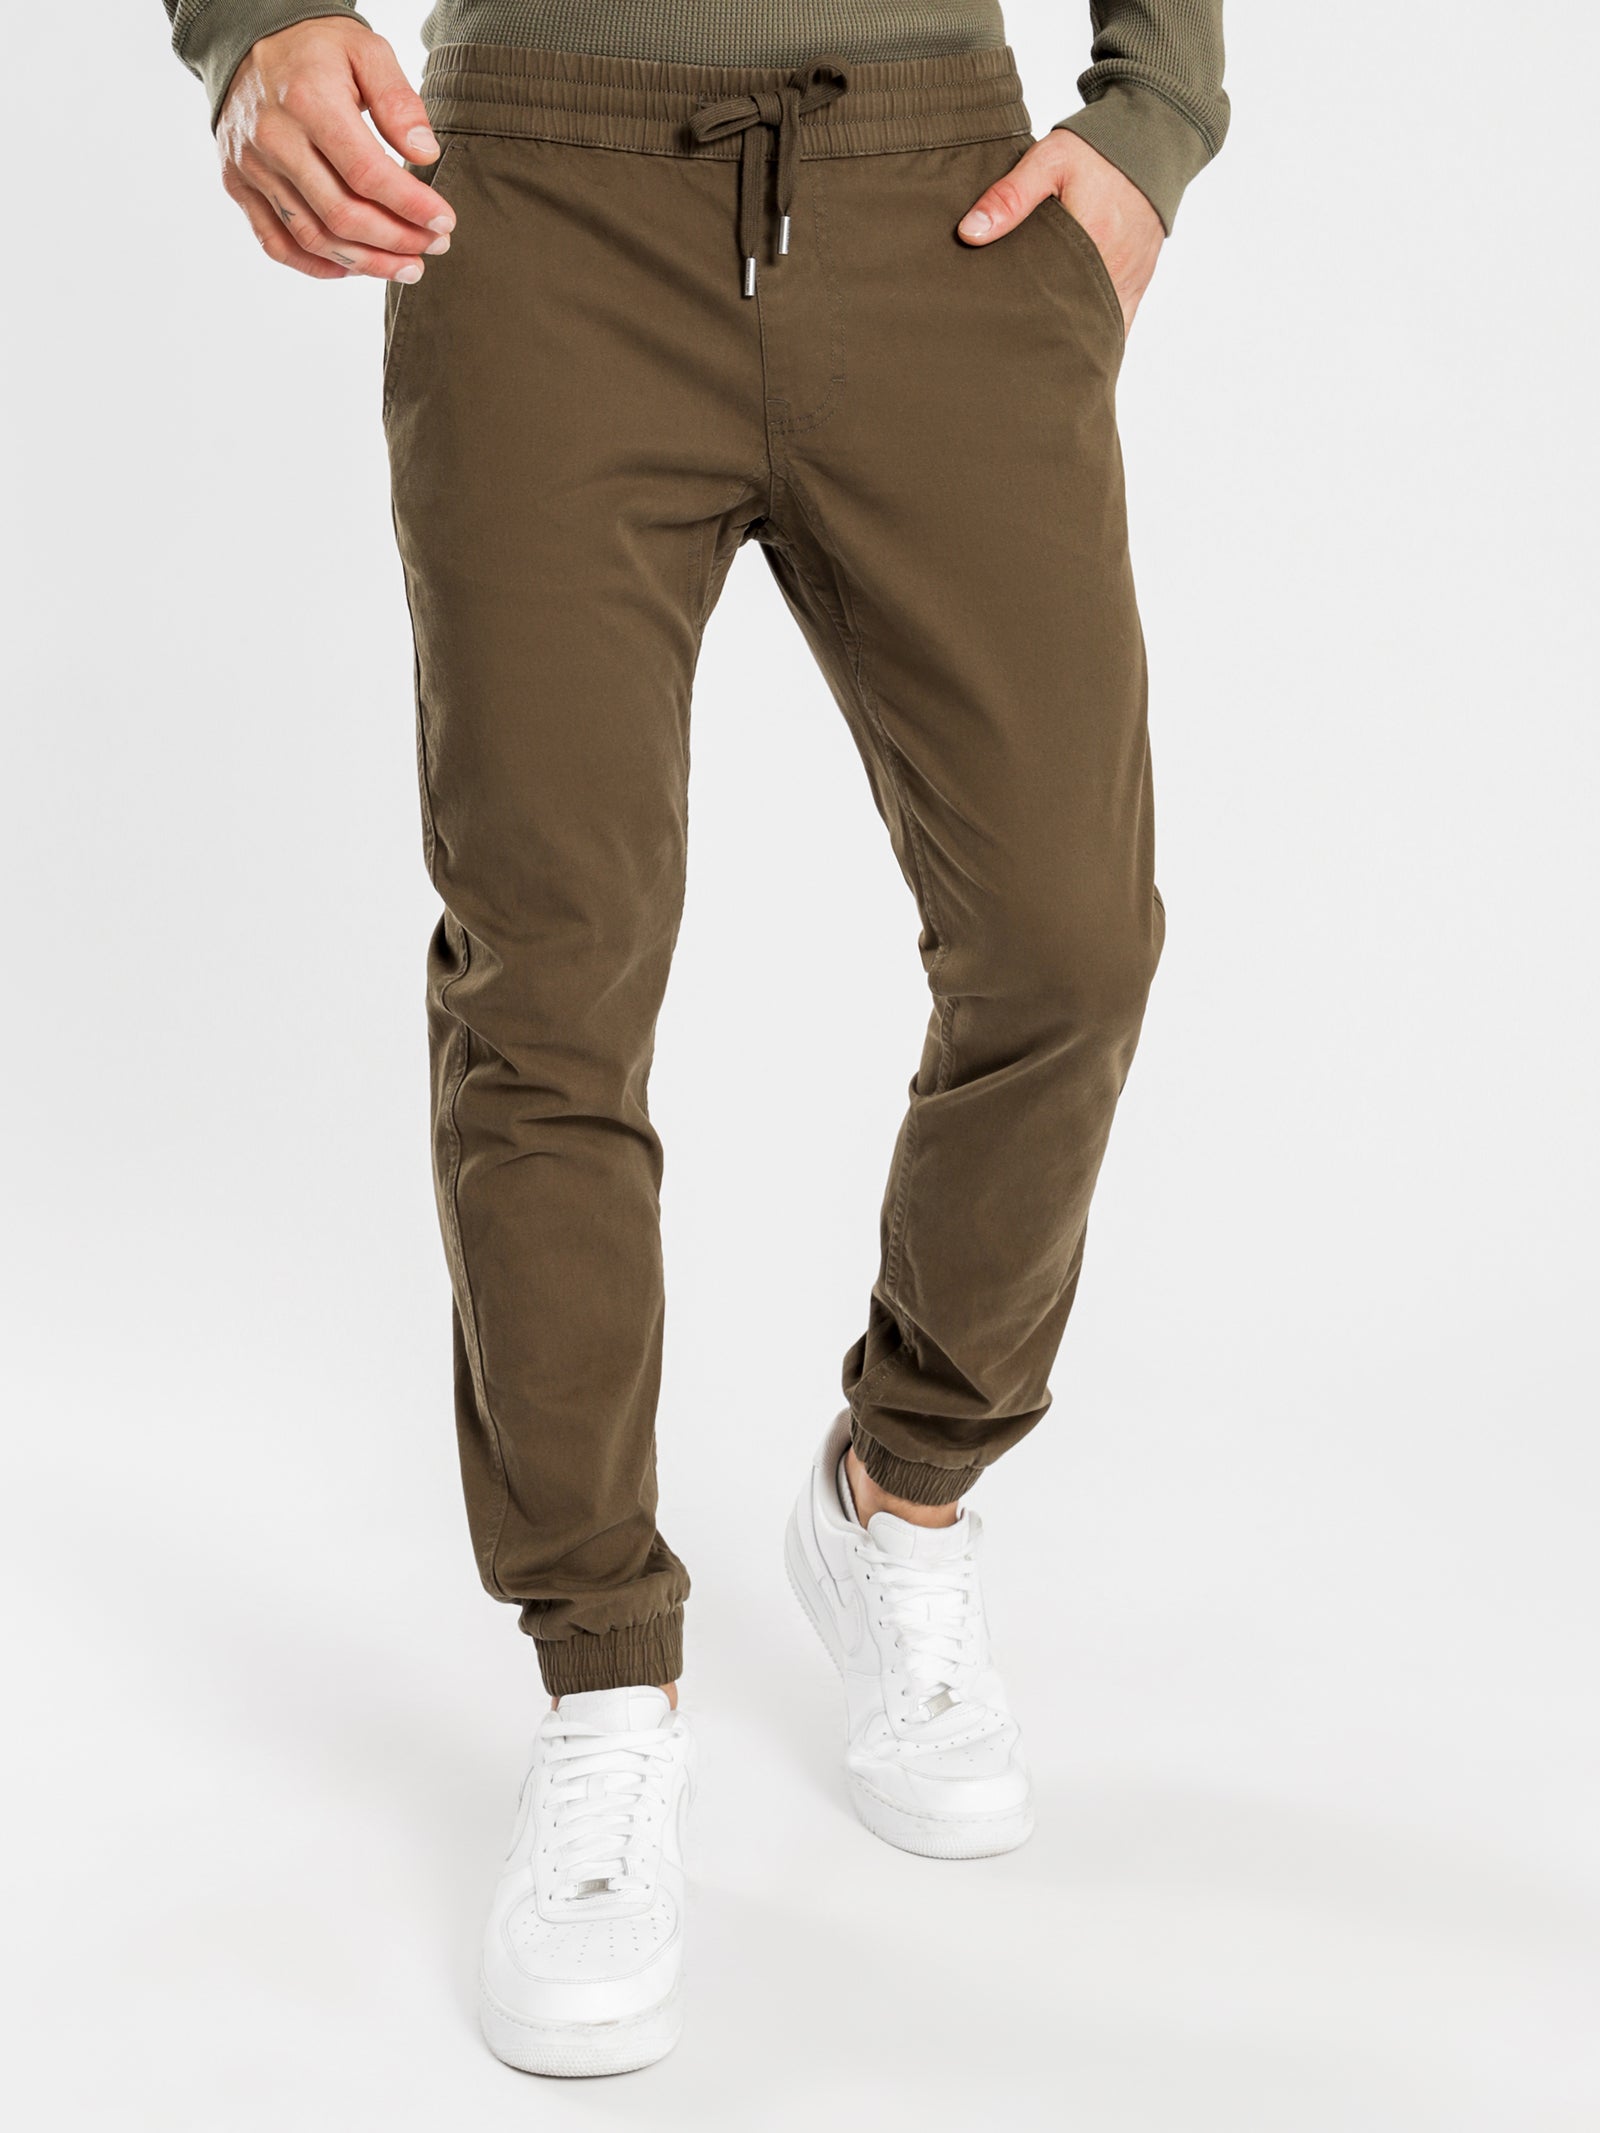 Boden Joggers in Olive Green - Glue Store